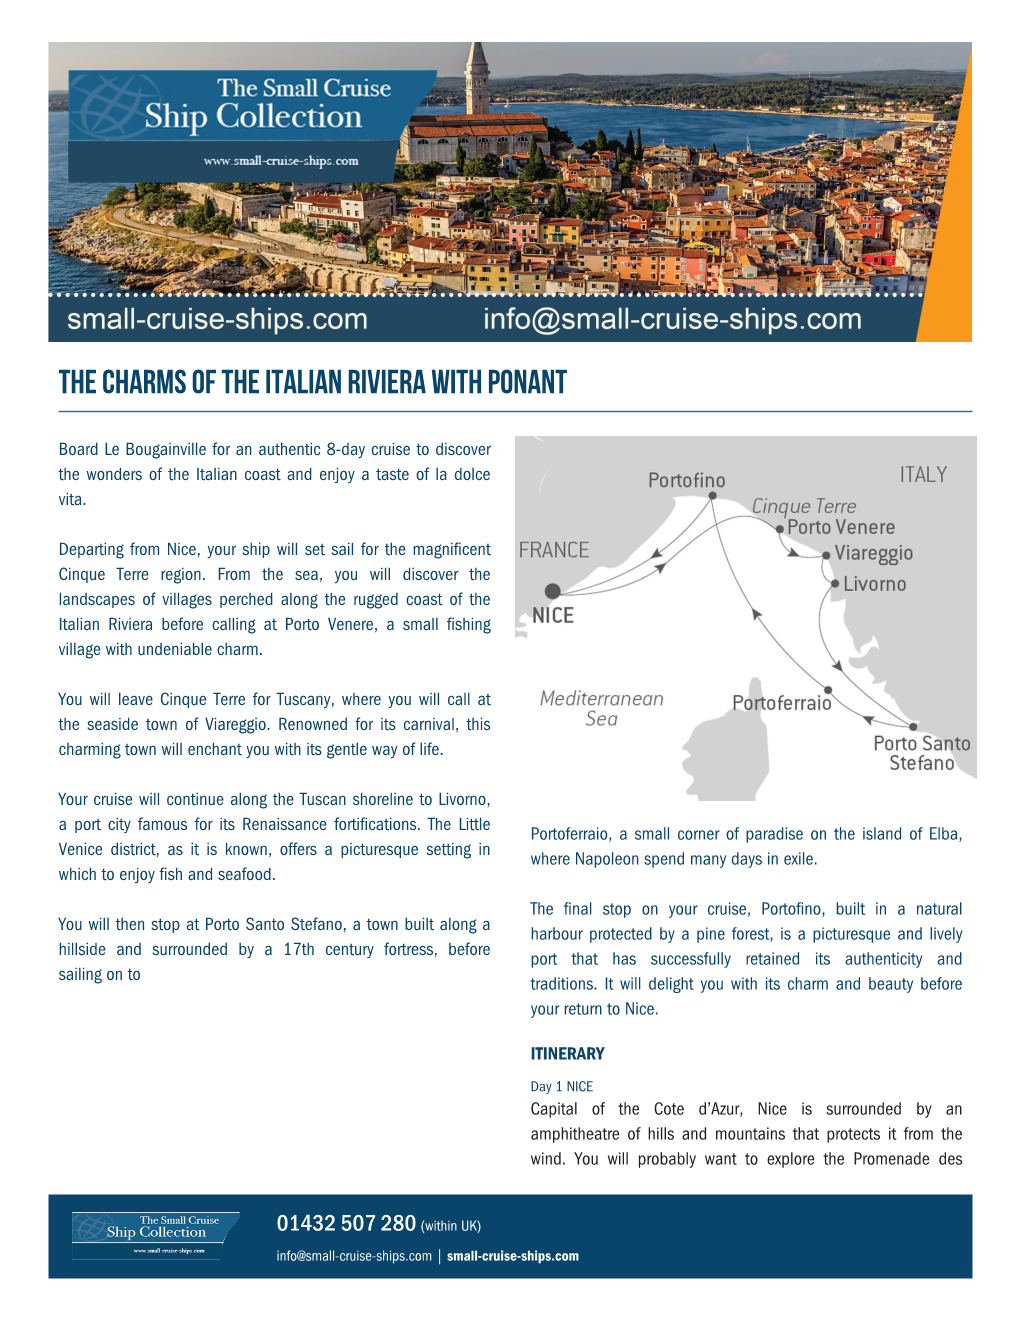 The Charms of the Italian Riviera with Ponant